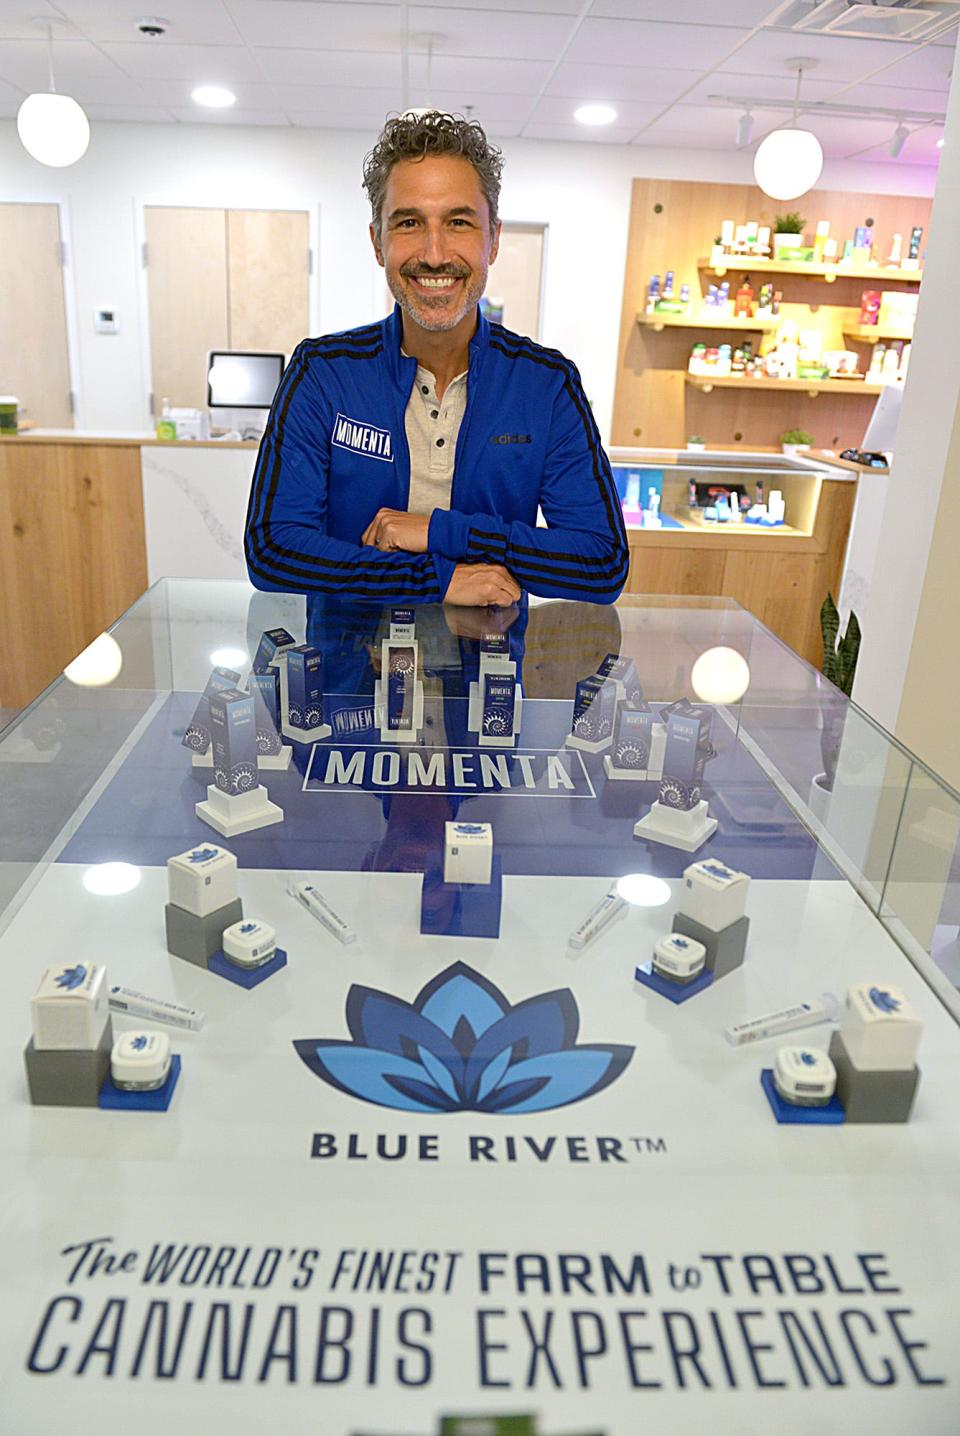 "Survivor" star Ethan Zohn pictured with products from Trulieve's Momenta brand, for which Zohn serves as an ambassador. He will run the 2022 Boston Marathon while using Momenta cannabis products.